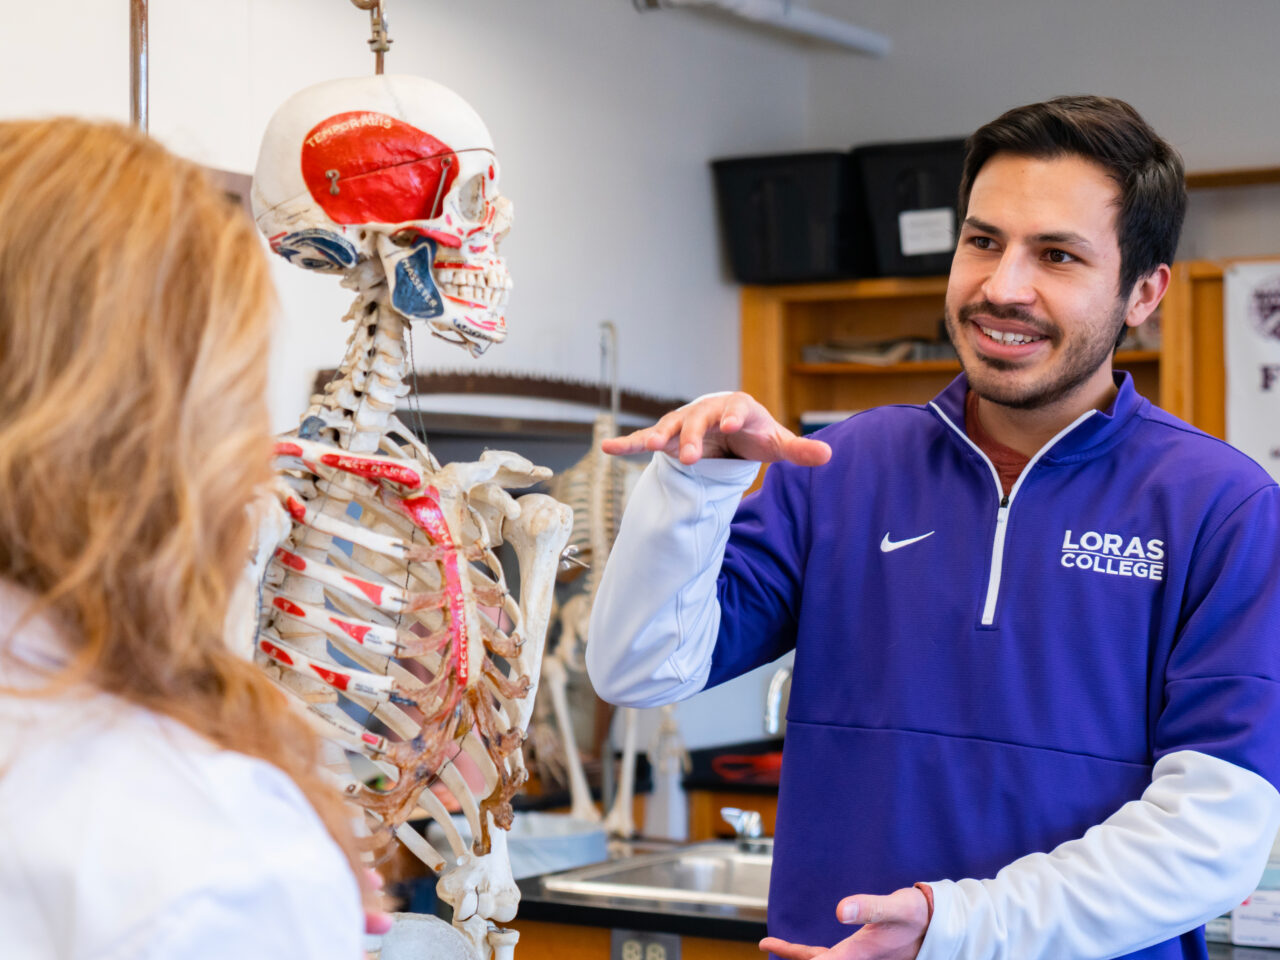 Loras Health Science Opportunities